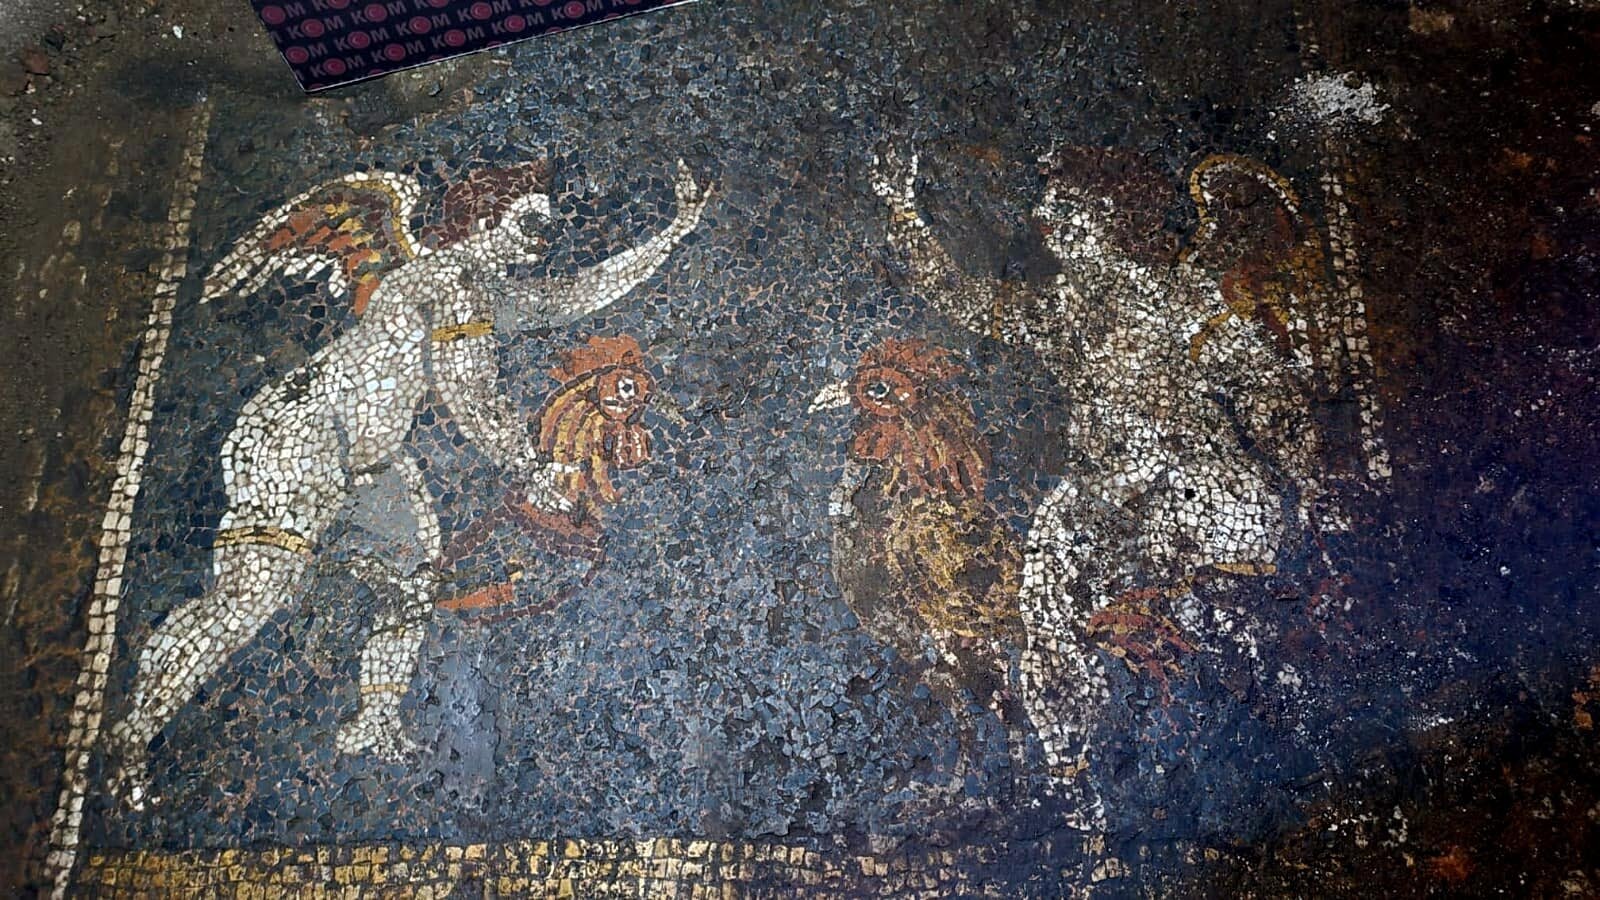 The mosaics discovered in the raids in Izmir province, Tuesday, Nov. 16, 2021. (DHA Photo)